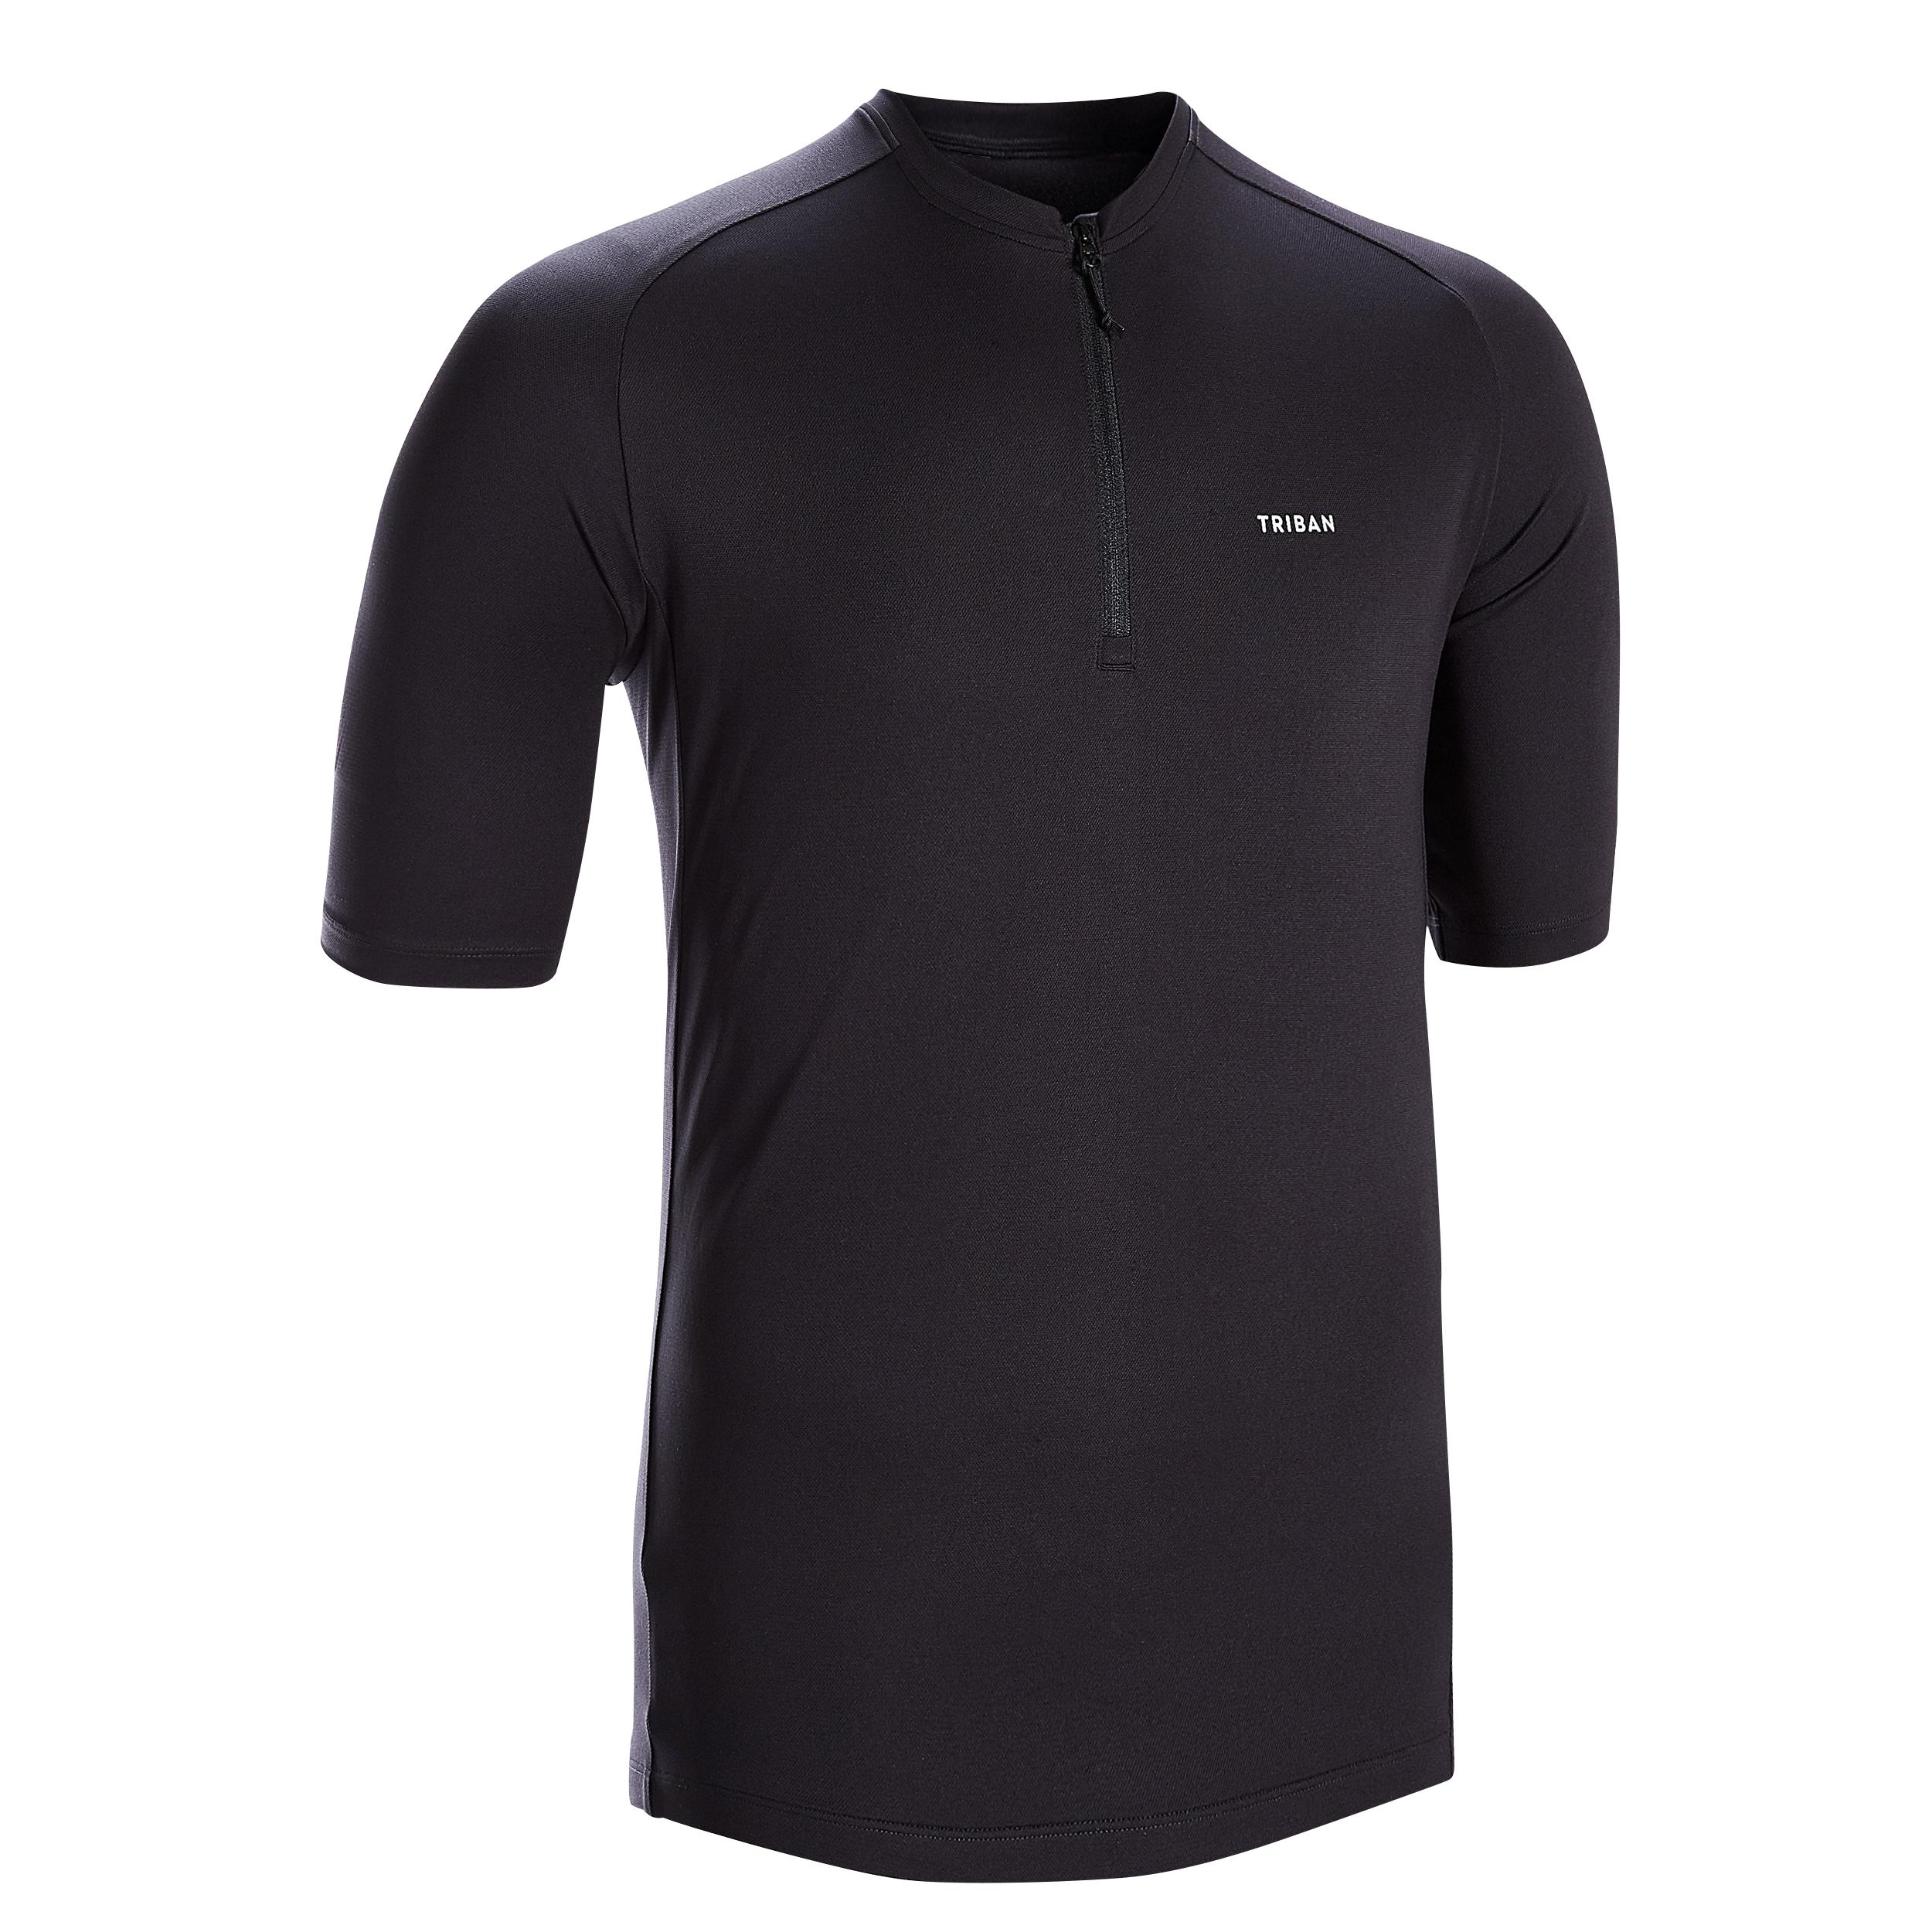 Men's Road Cycling Short-Sleeved Jersey 